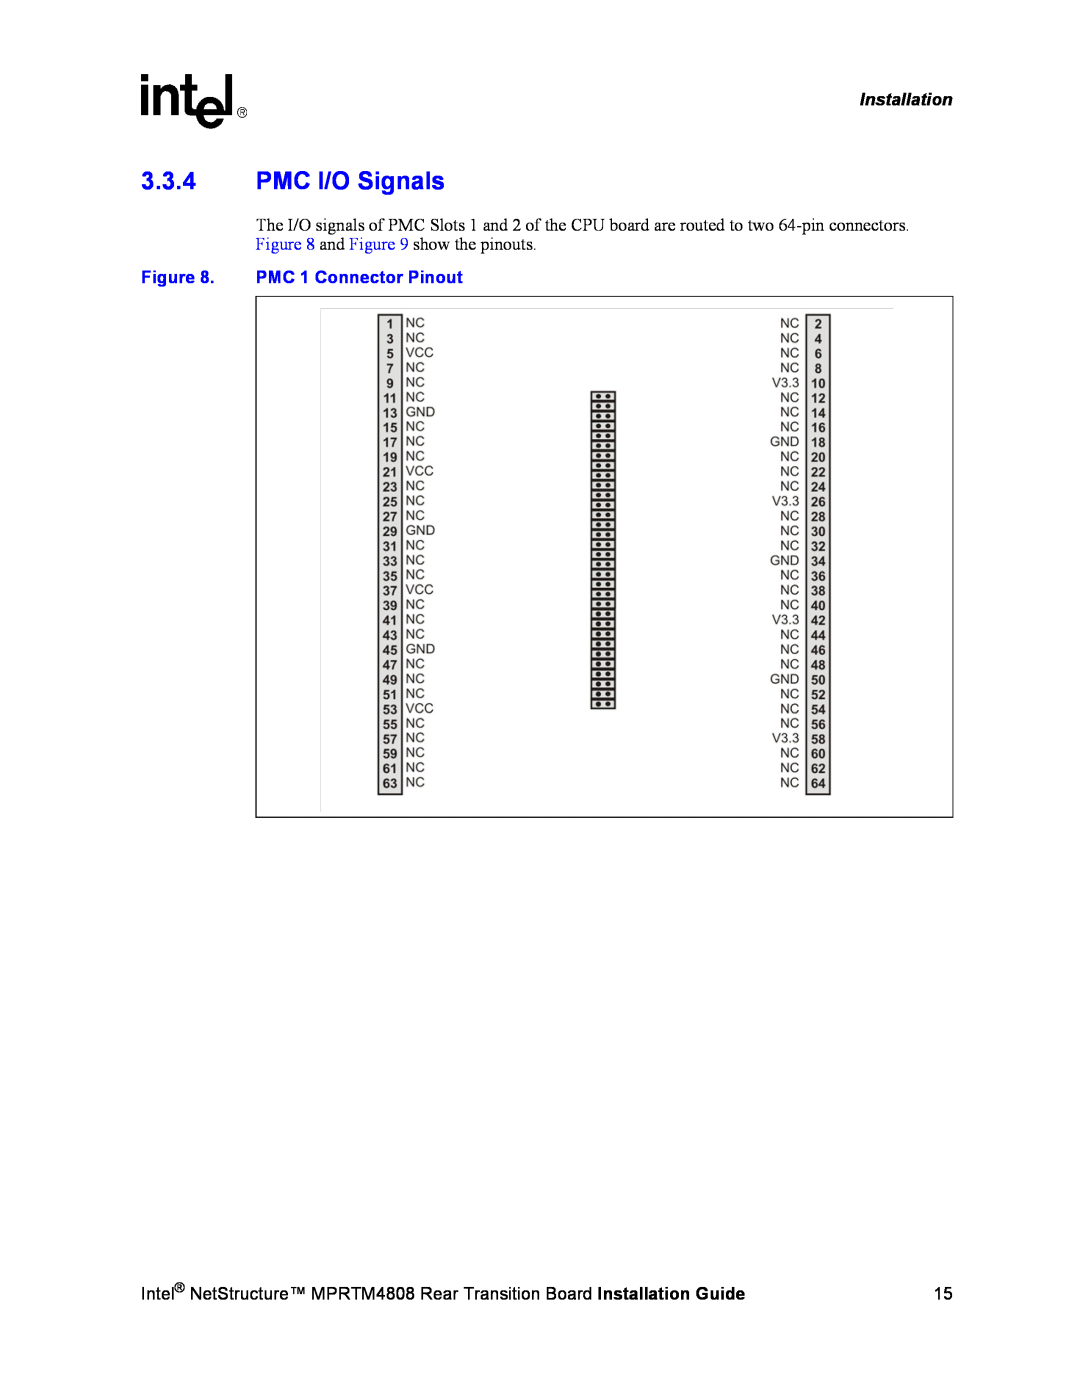 Intel MPRTM4808 manual 3.3.4PMC I/O Signals, PMC 1 Connector Pinout, Installation 